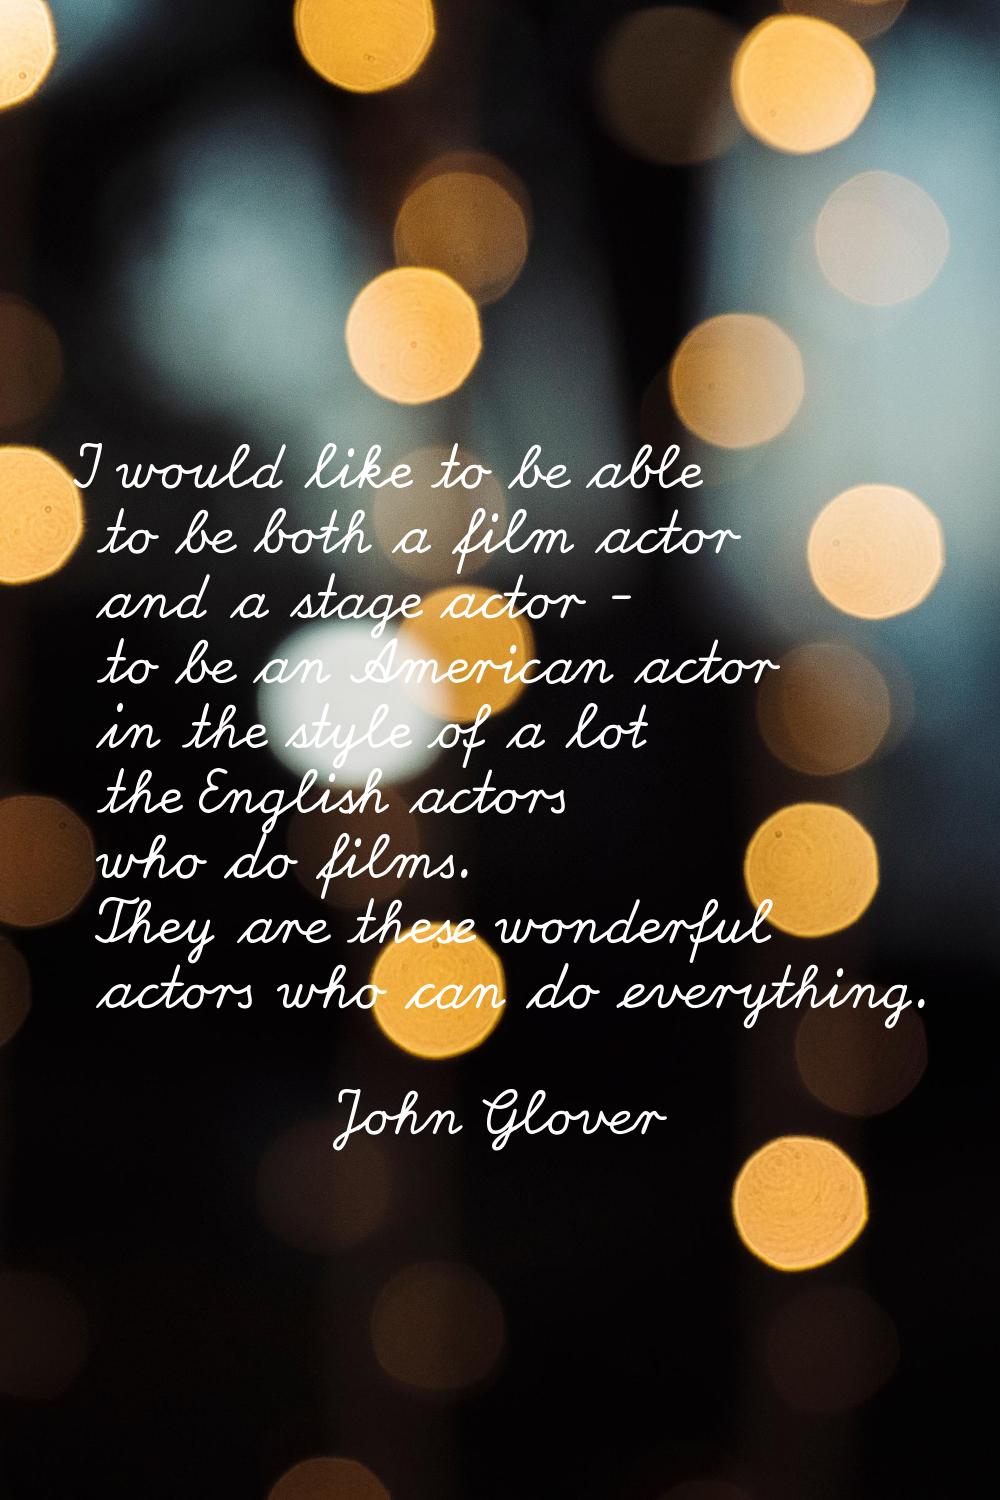 I would like to be able to be both a film actor and a stage actor - to be an American actor in the 